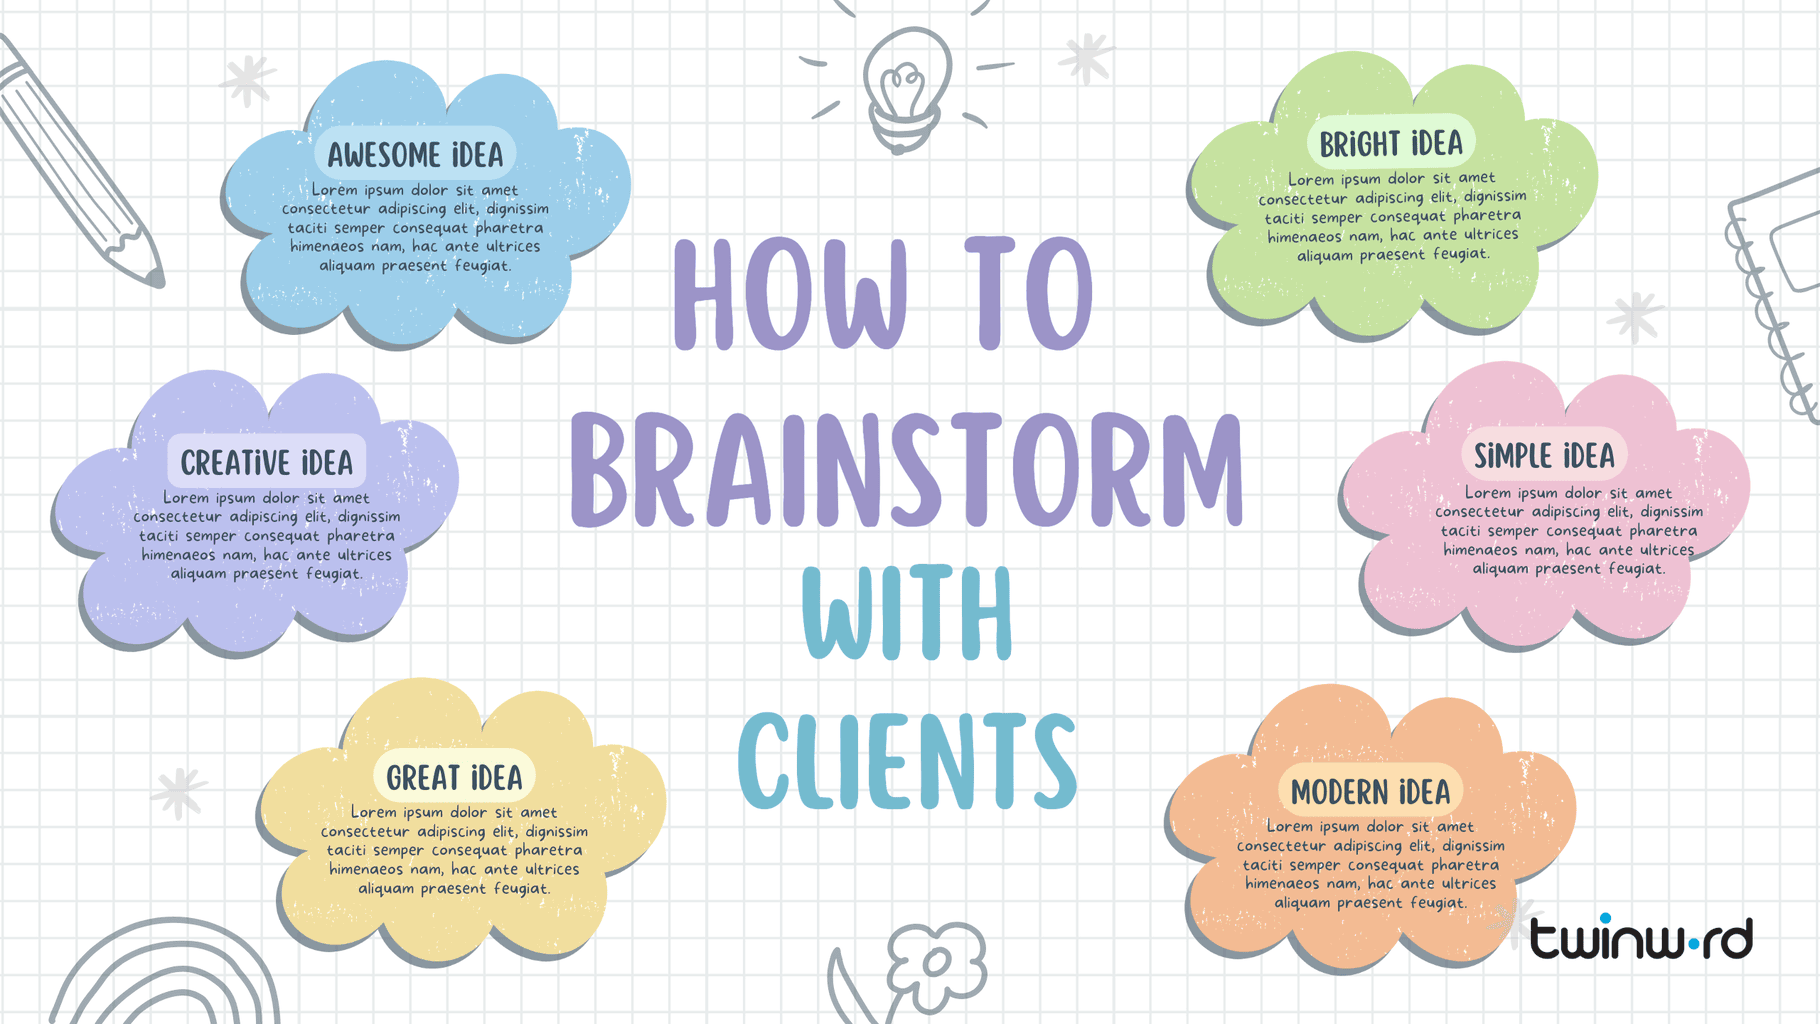 How to Brainstorm Keywords with Clients – Google Sheets Template